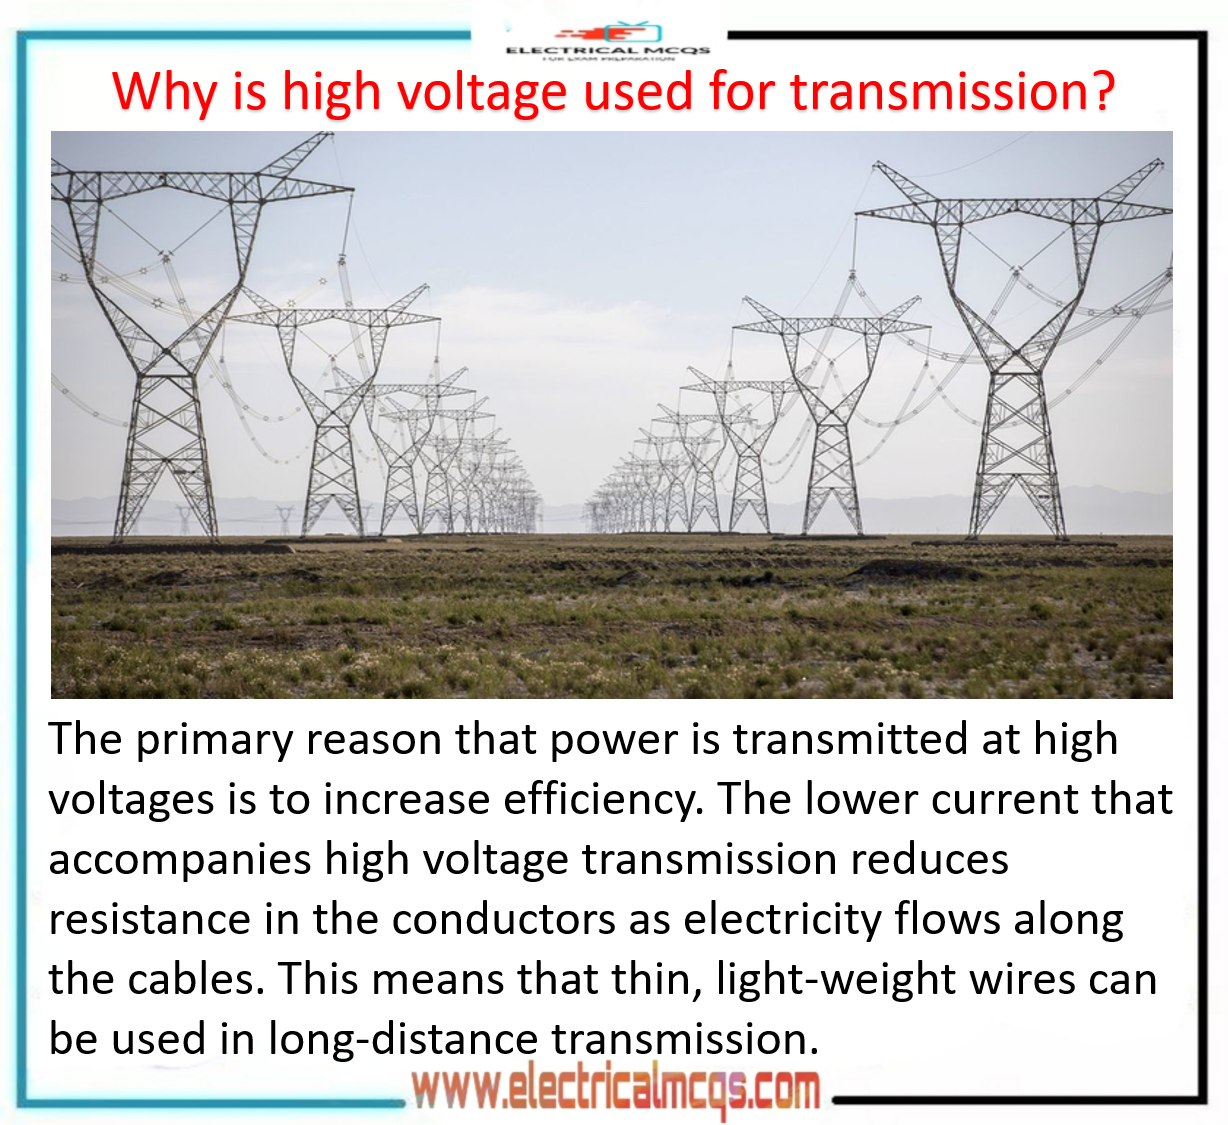 What is the disadvantage of higher voltage?